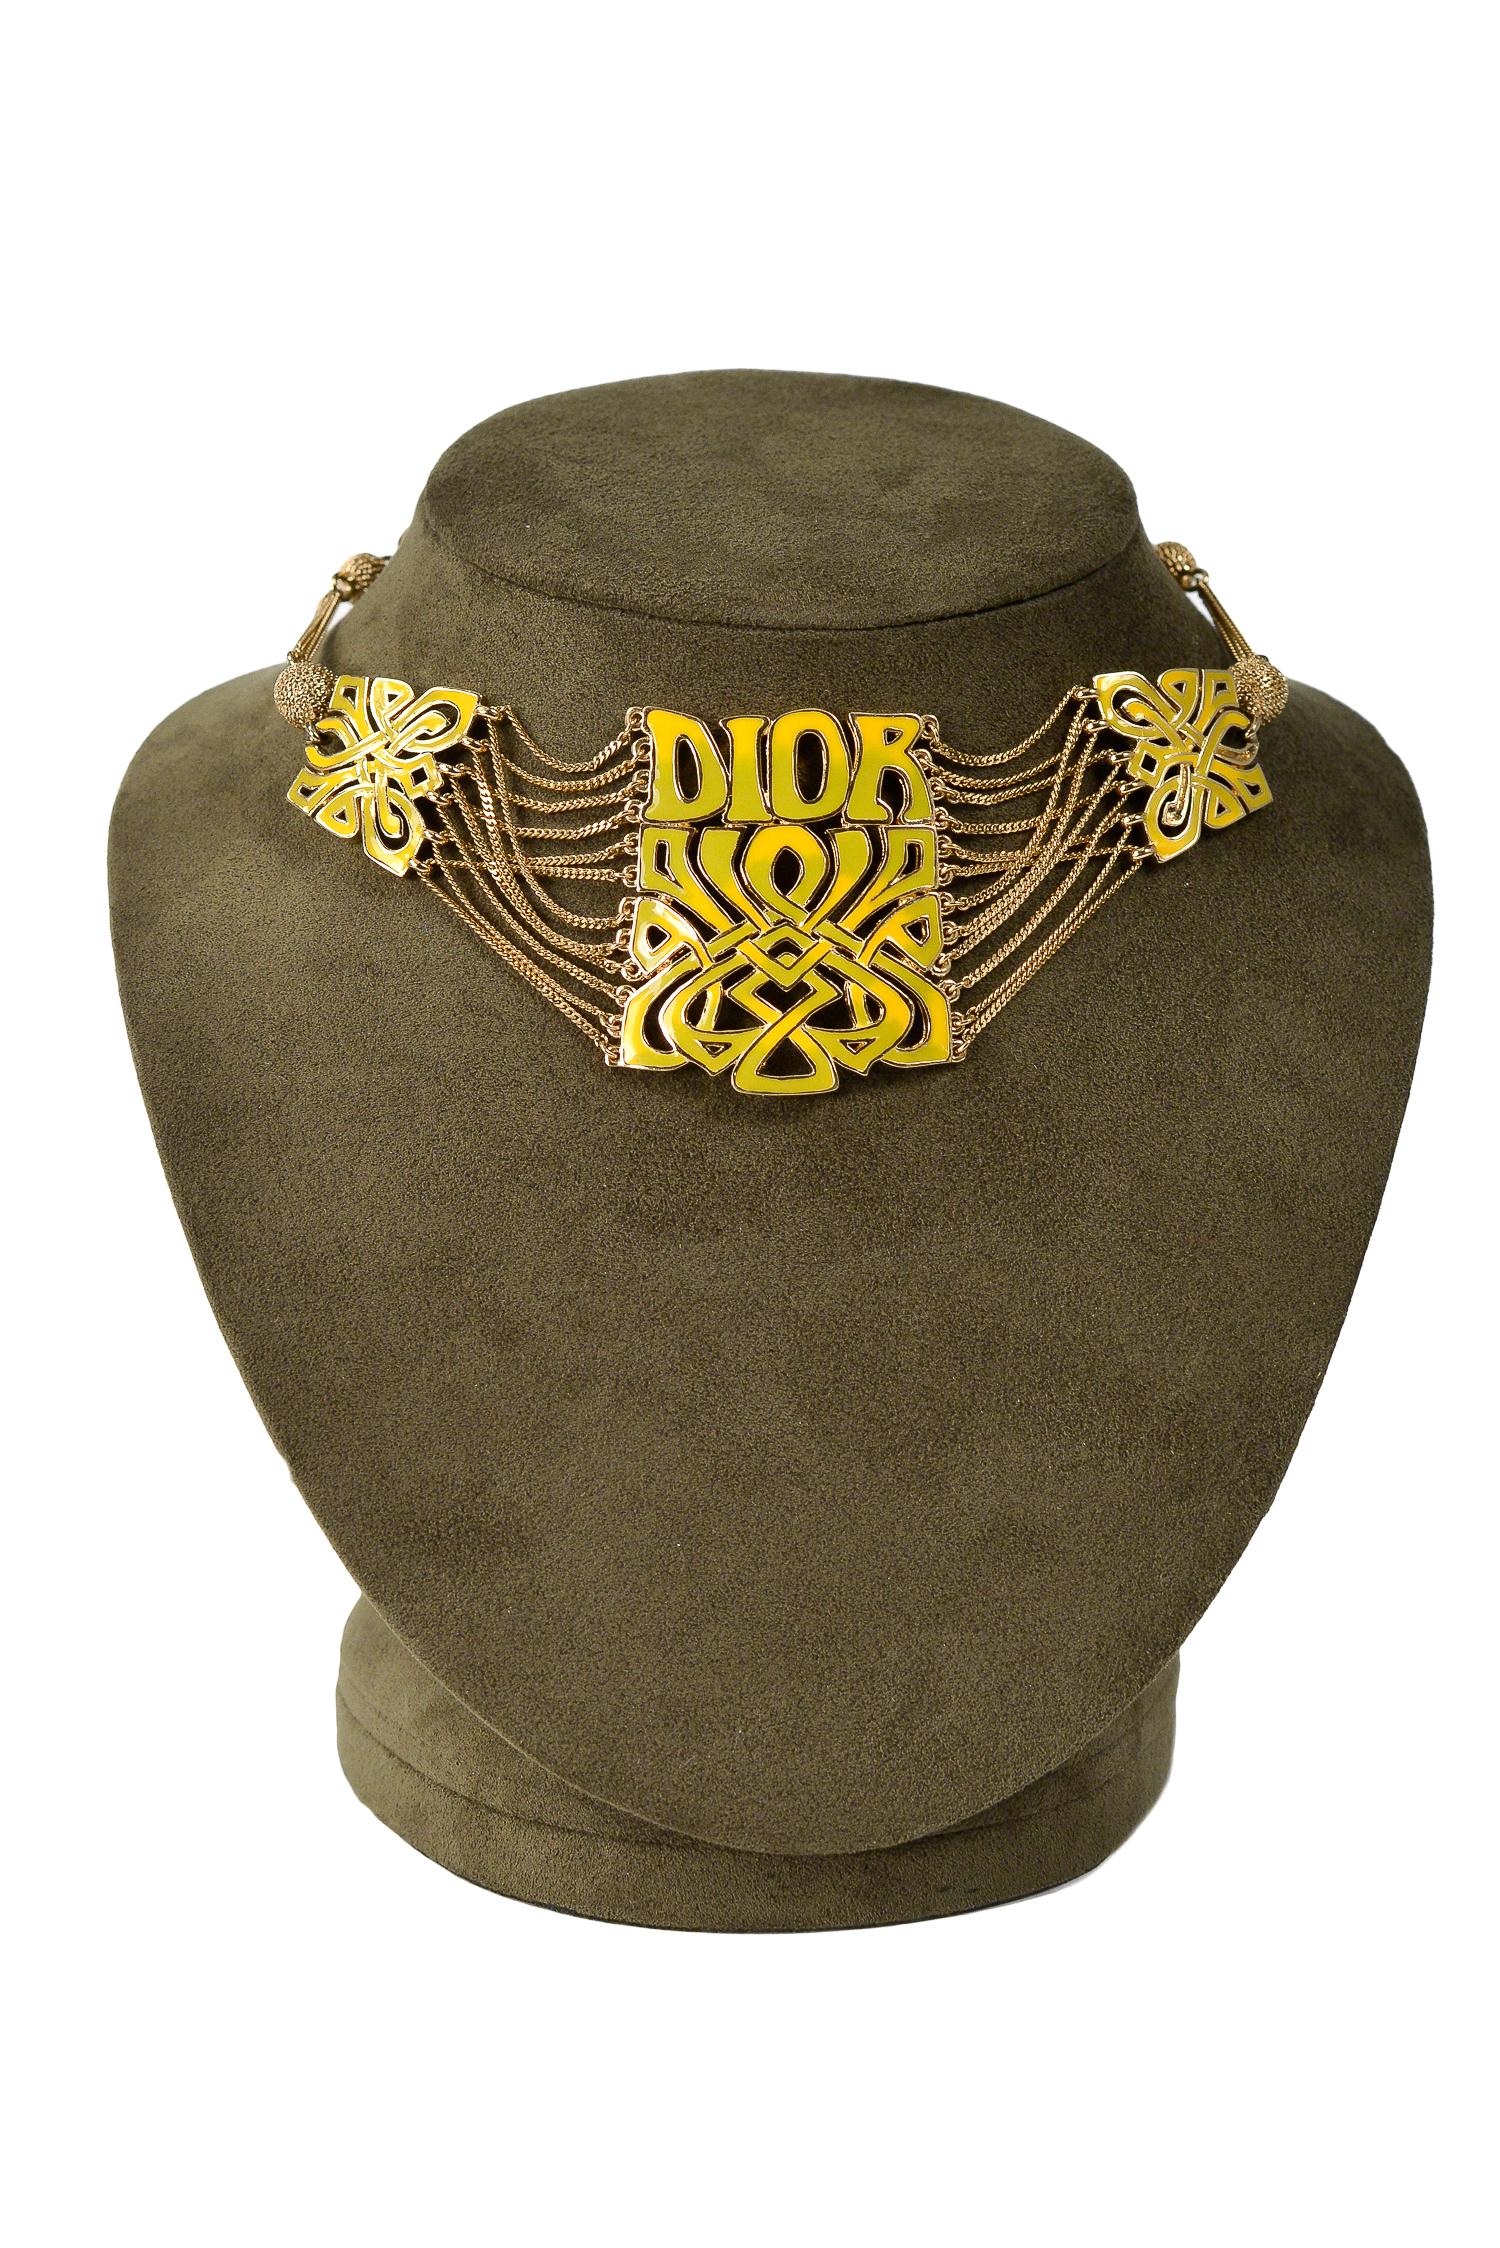 Vintage Christian Dior by John Galliano yellow and green ombre enamel art nouveau-inspired 